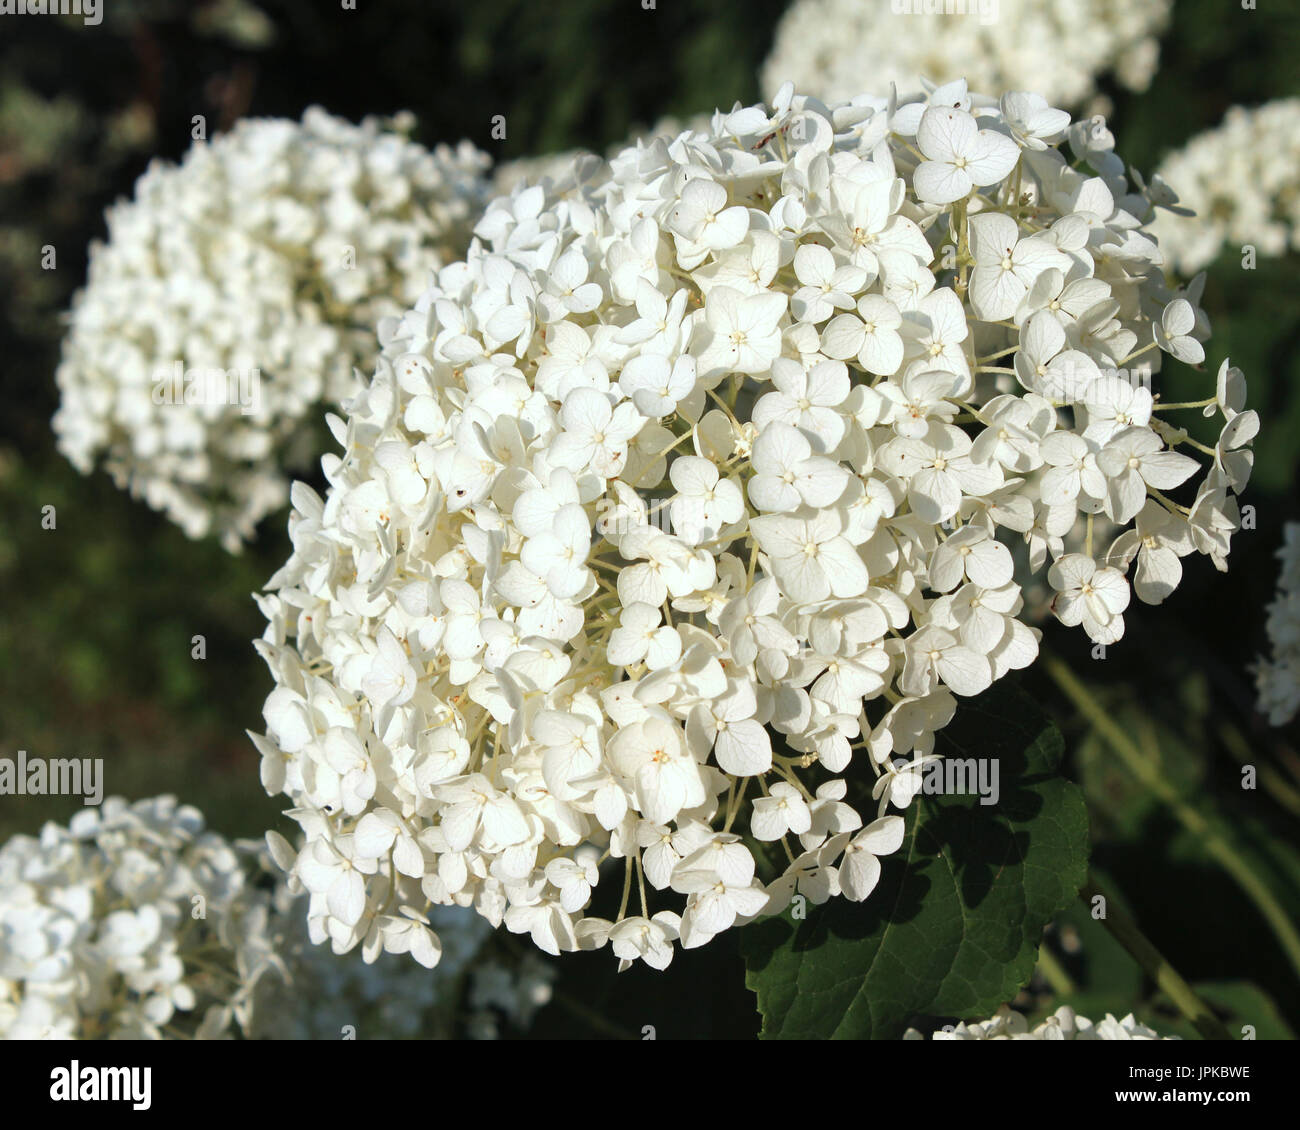 Creamy White Hydrangea High Resolution Stock Photography and Images - Alamy